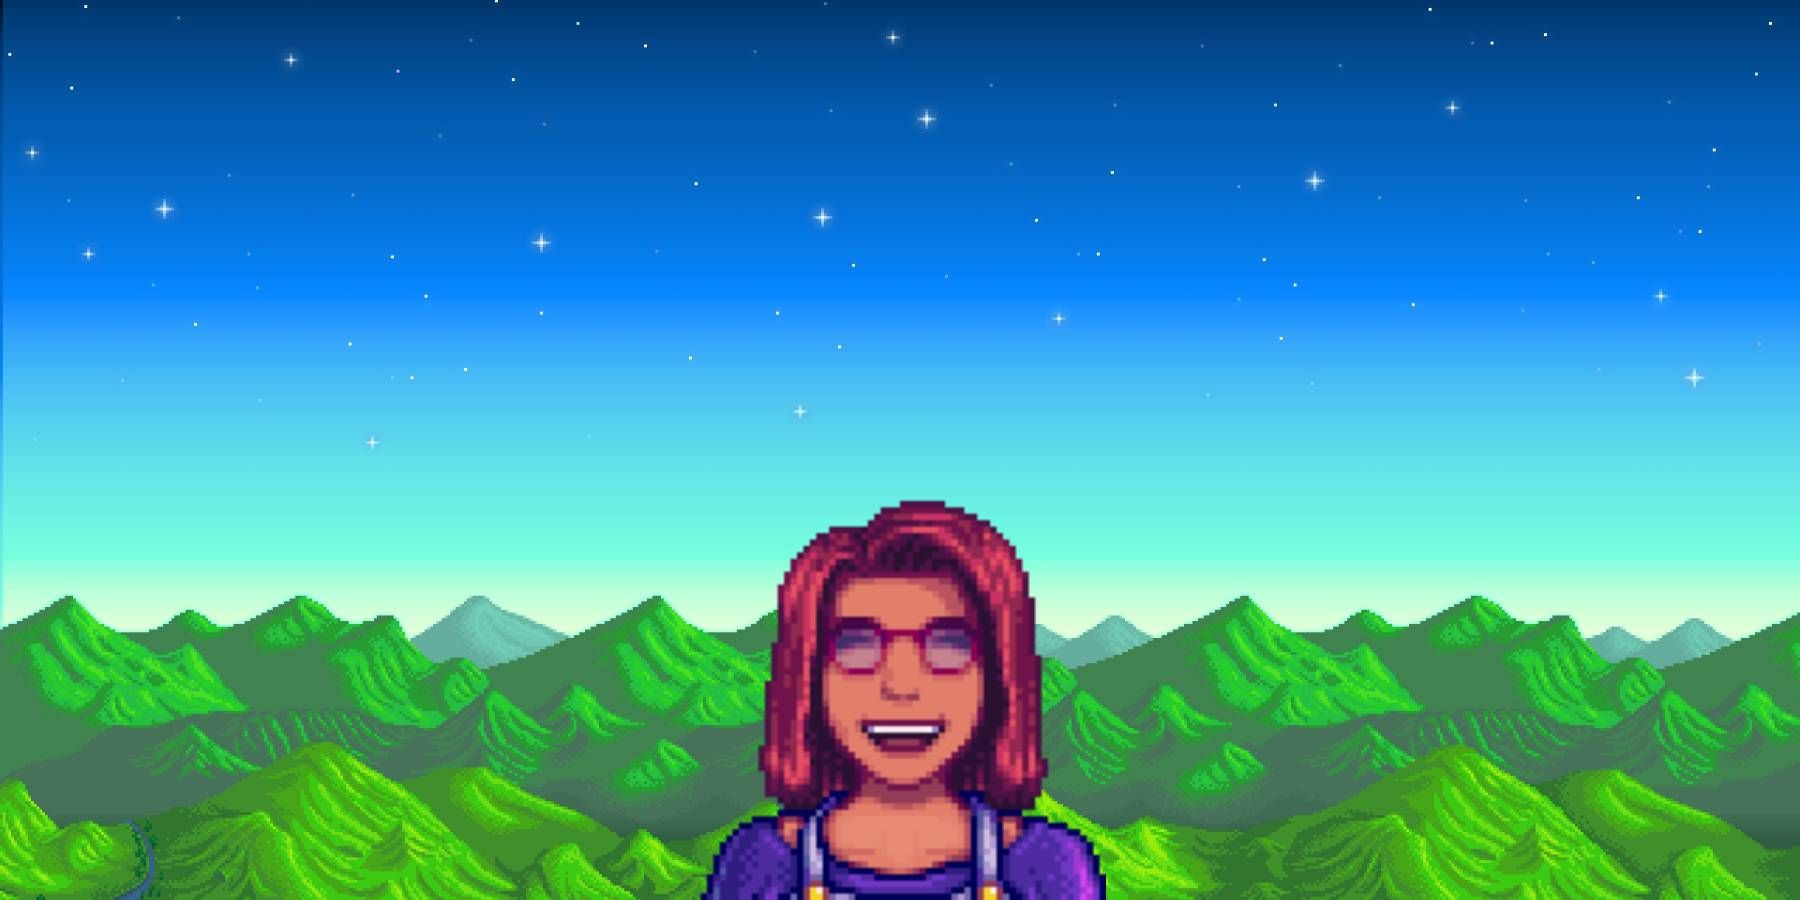 Maru laughing over the hills from the Stardew Valley intro